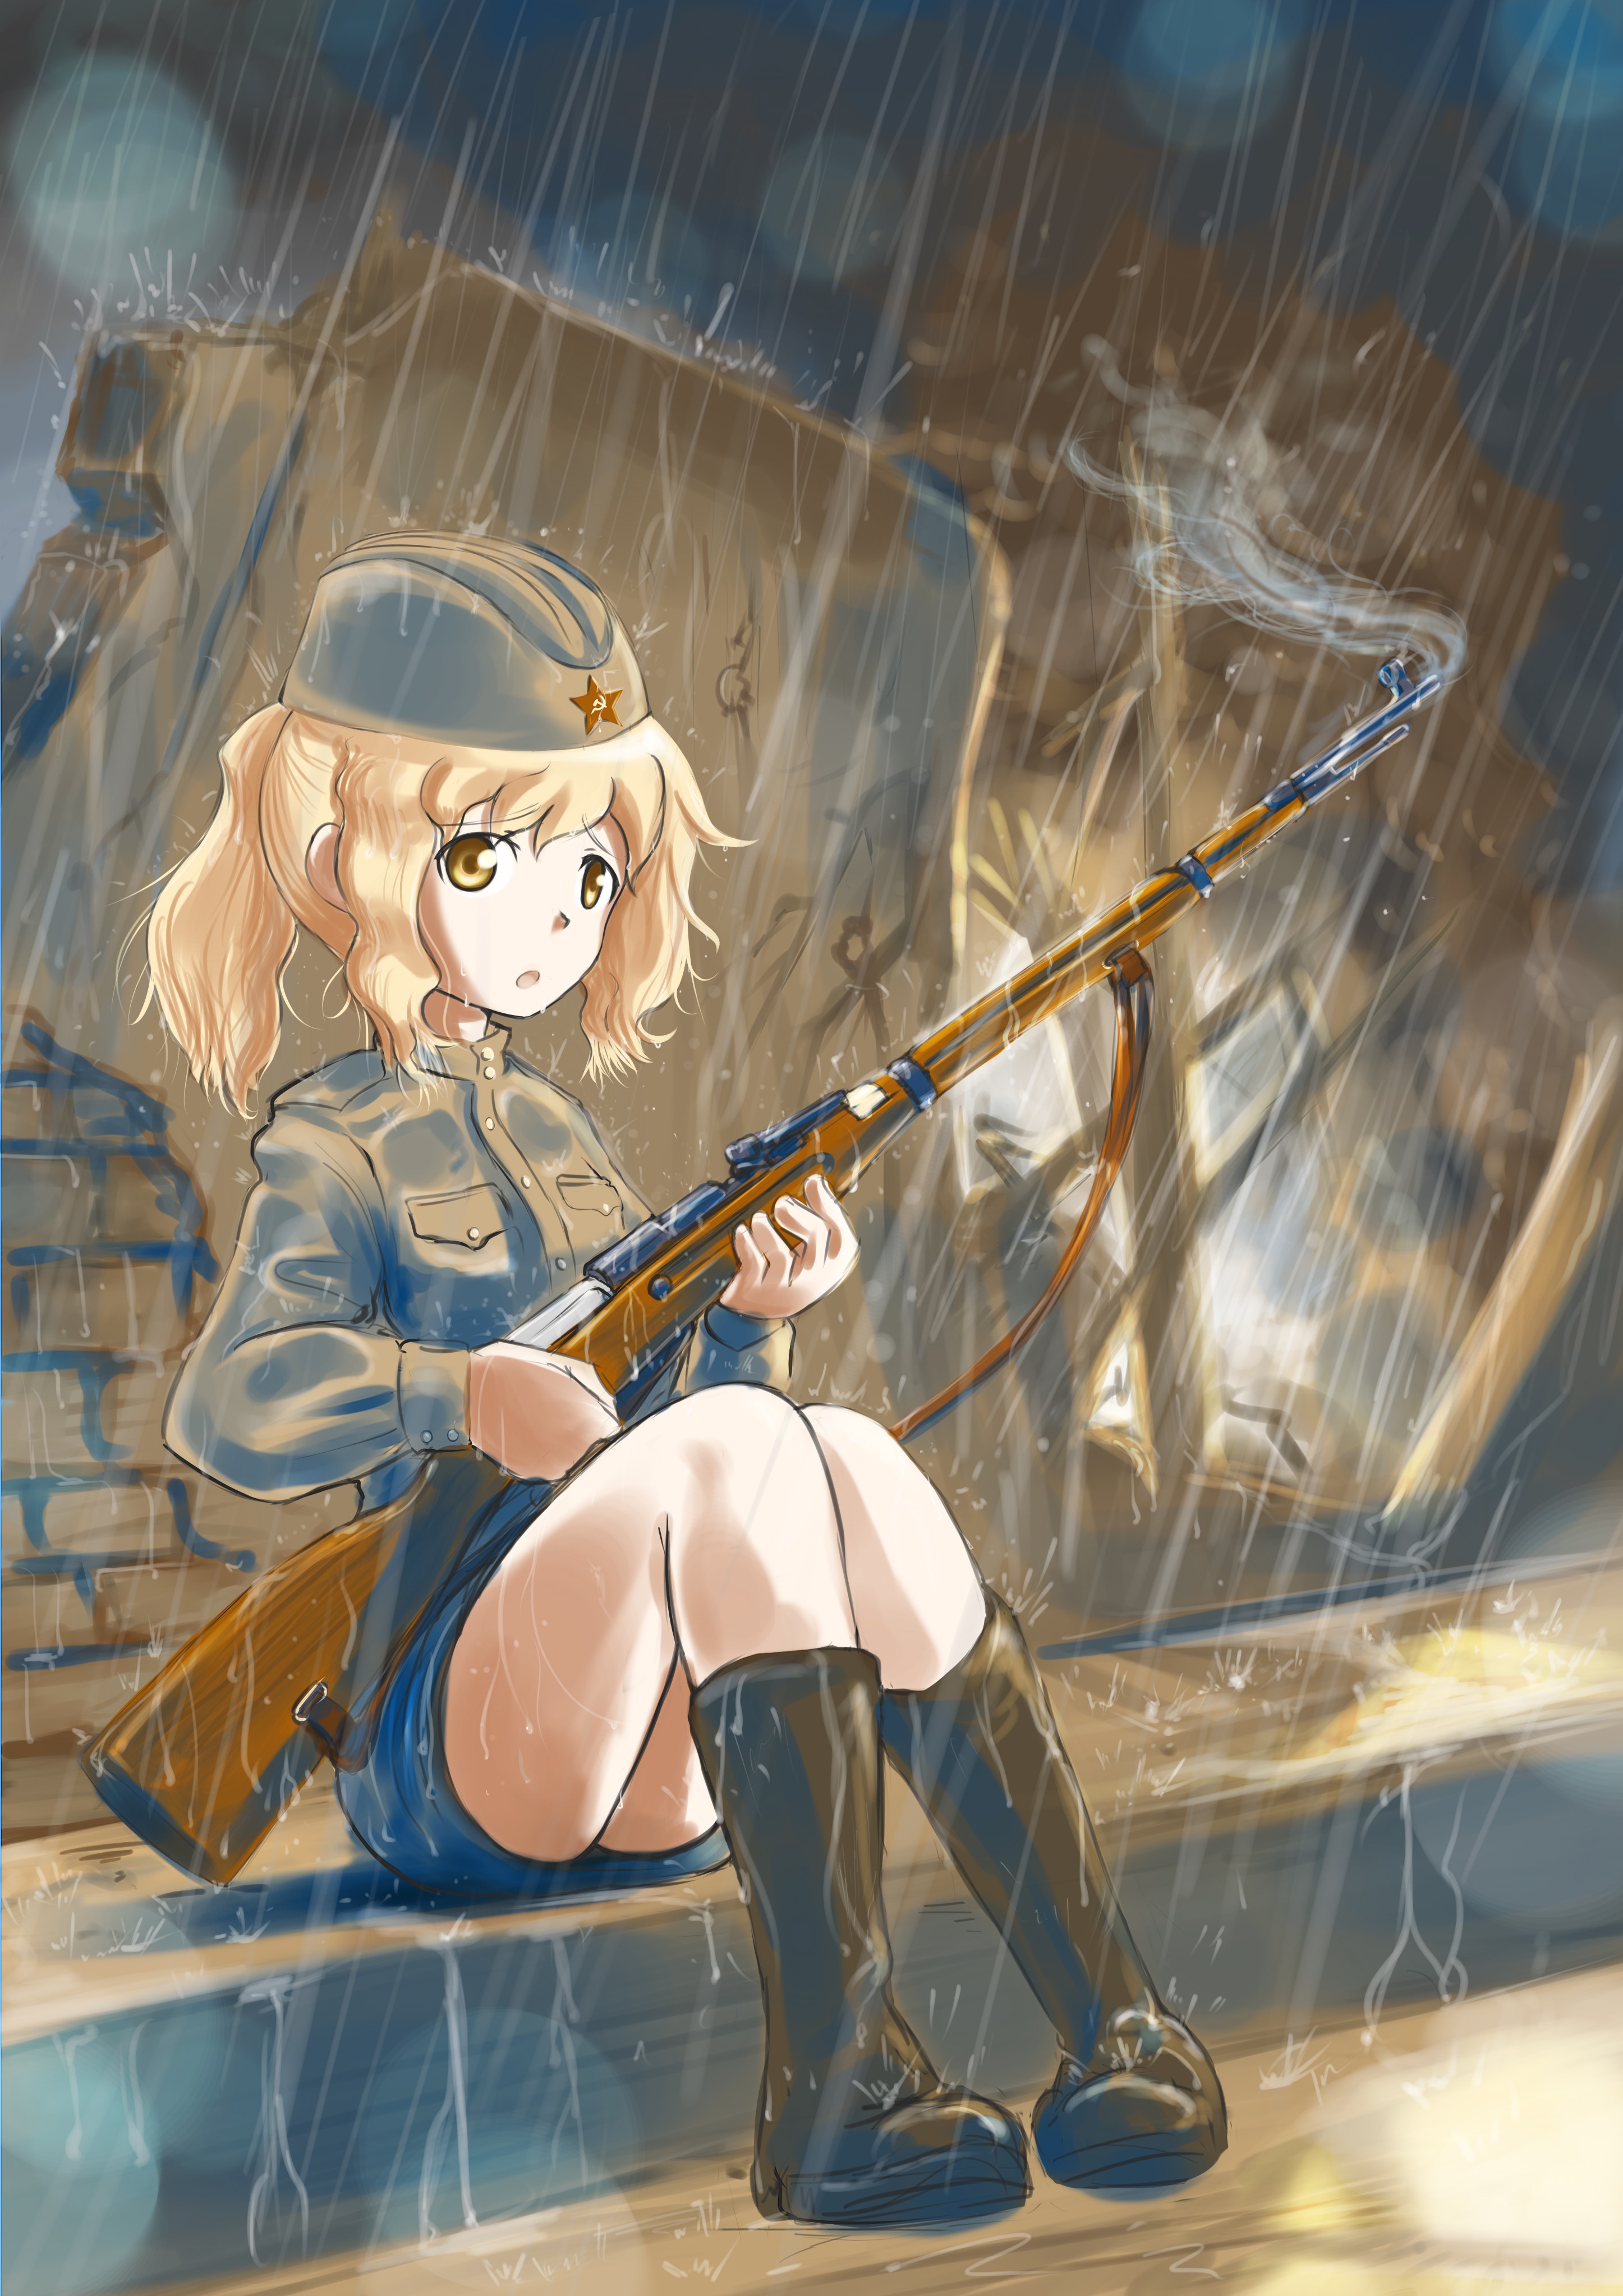 Anime 2893x4092 anime anime girls weapon gun military uniform Soviet Army USSR Pixiv knees together Fear (People) rifles girls with guns boots soldier blonde hat